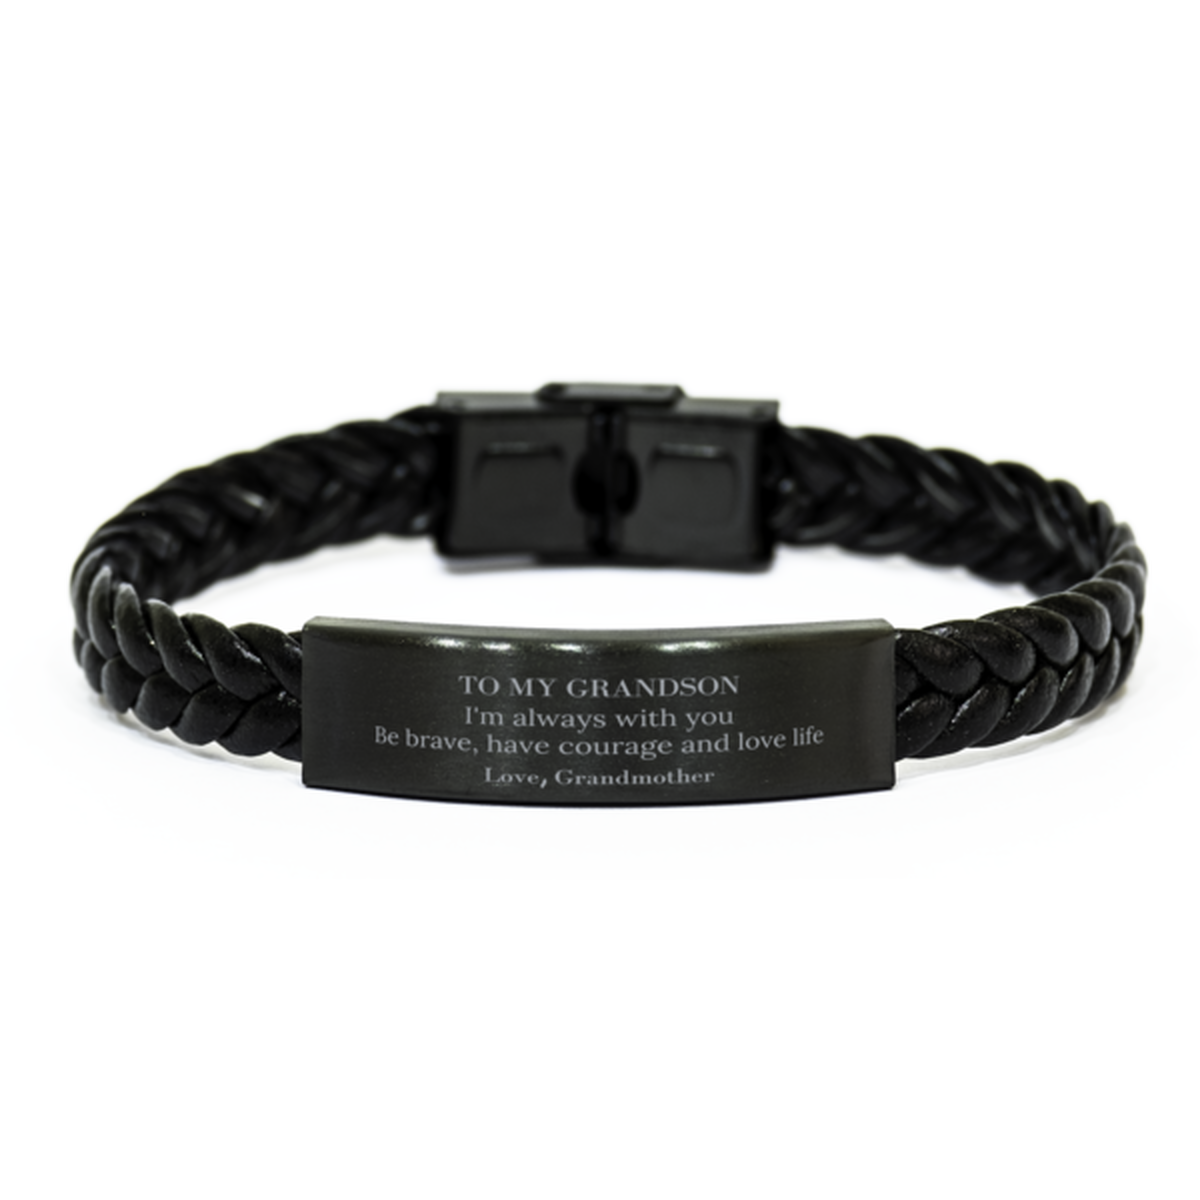 To My Grandson Gifts from Grandmother, Unique Braided Leather Bracelet Inspirational Christmas Birthday Graduation Gifts for Grandson I'm always with you. Be brave, have courage and love life. Love, Grandmother